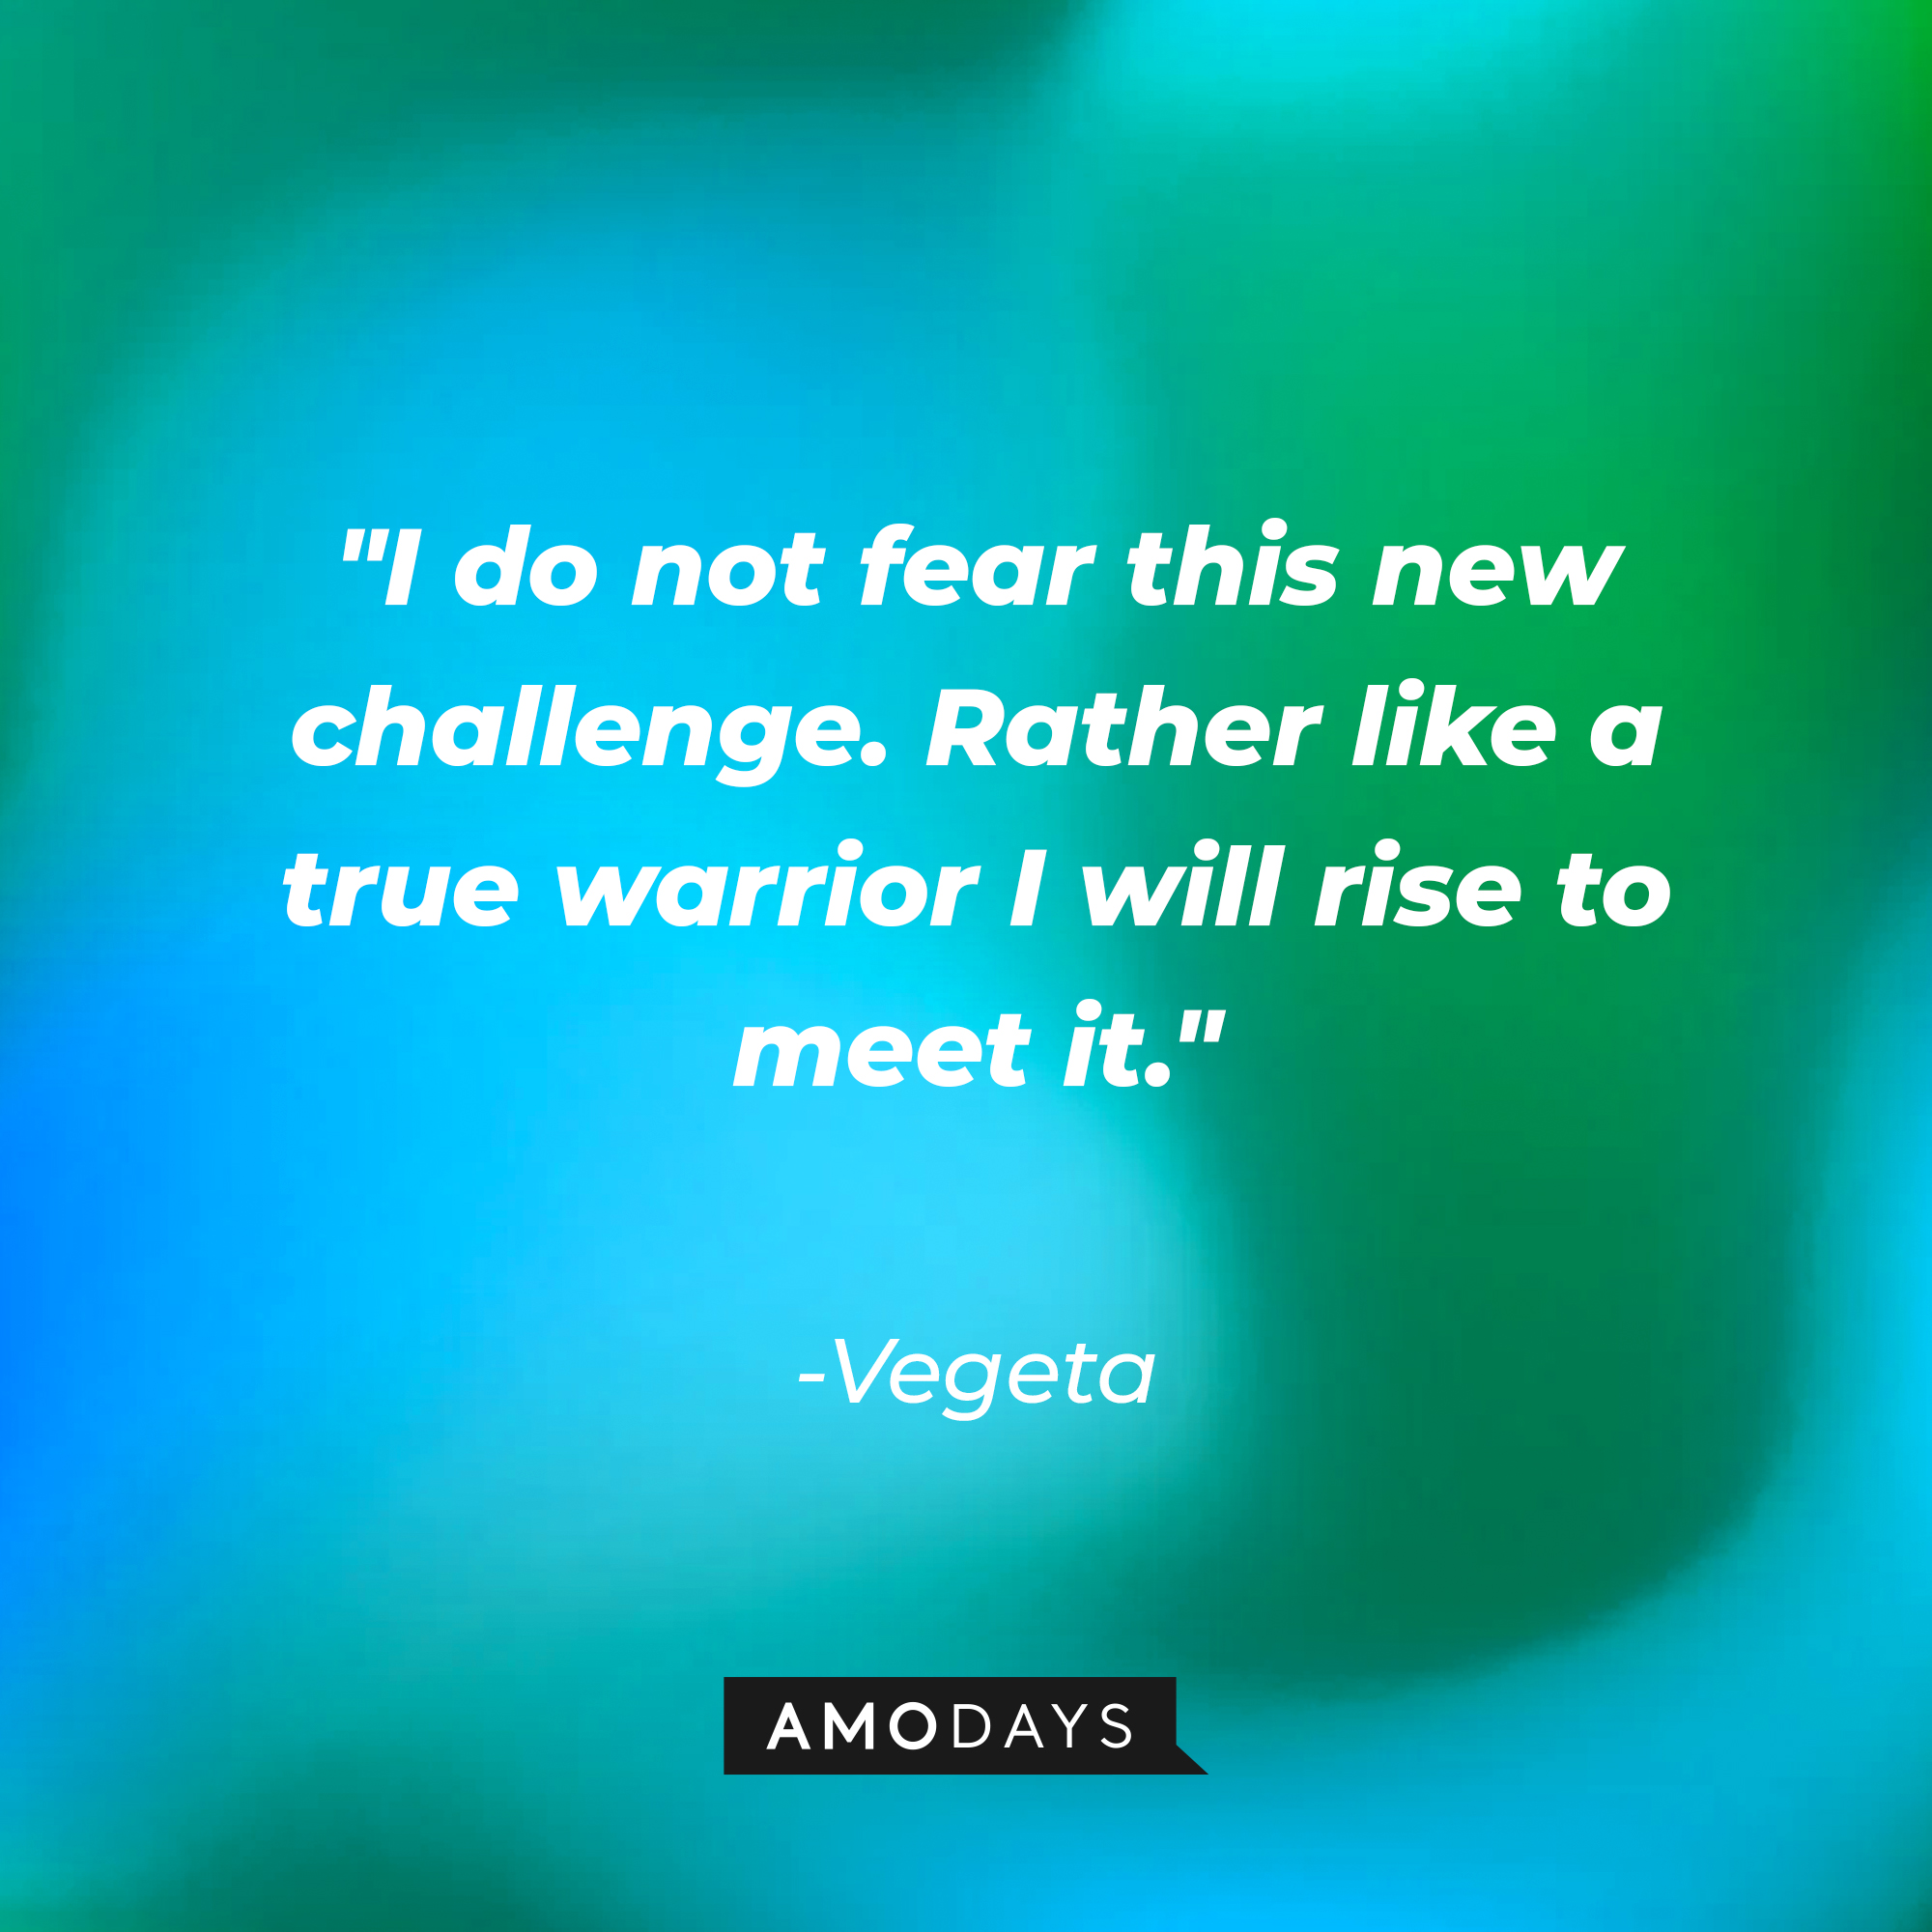 Vegeta's quote: "I do not fear this new challenge. Rather like a true warrior I will rise to meet it." | Source: Amodays